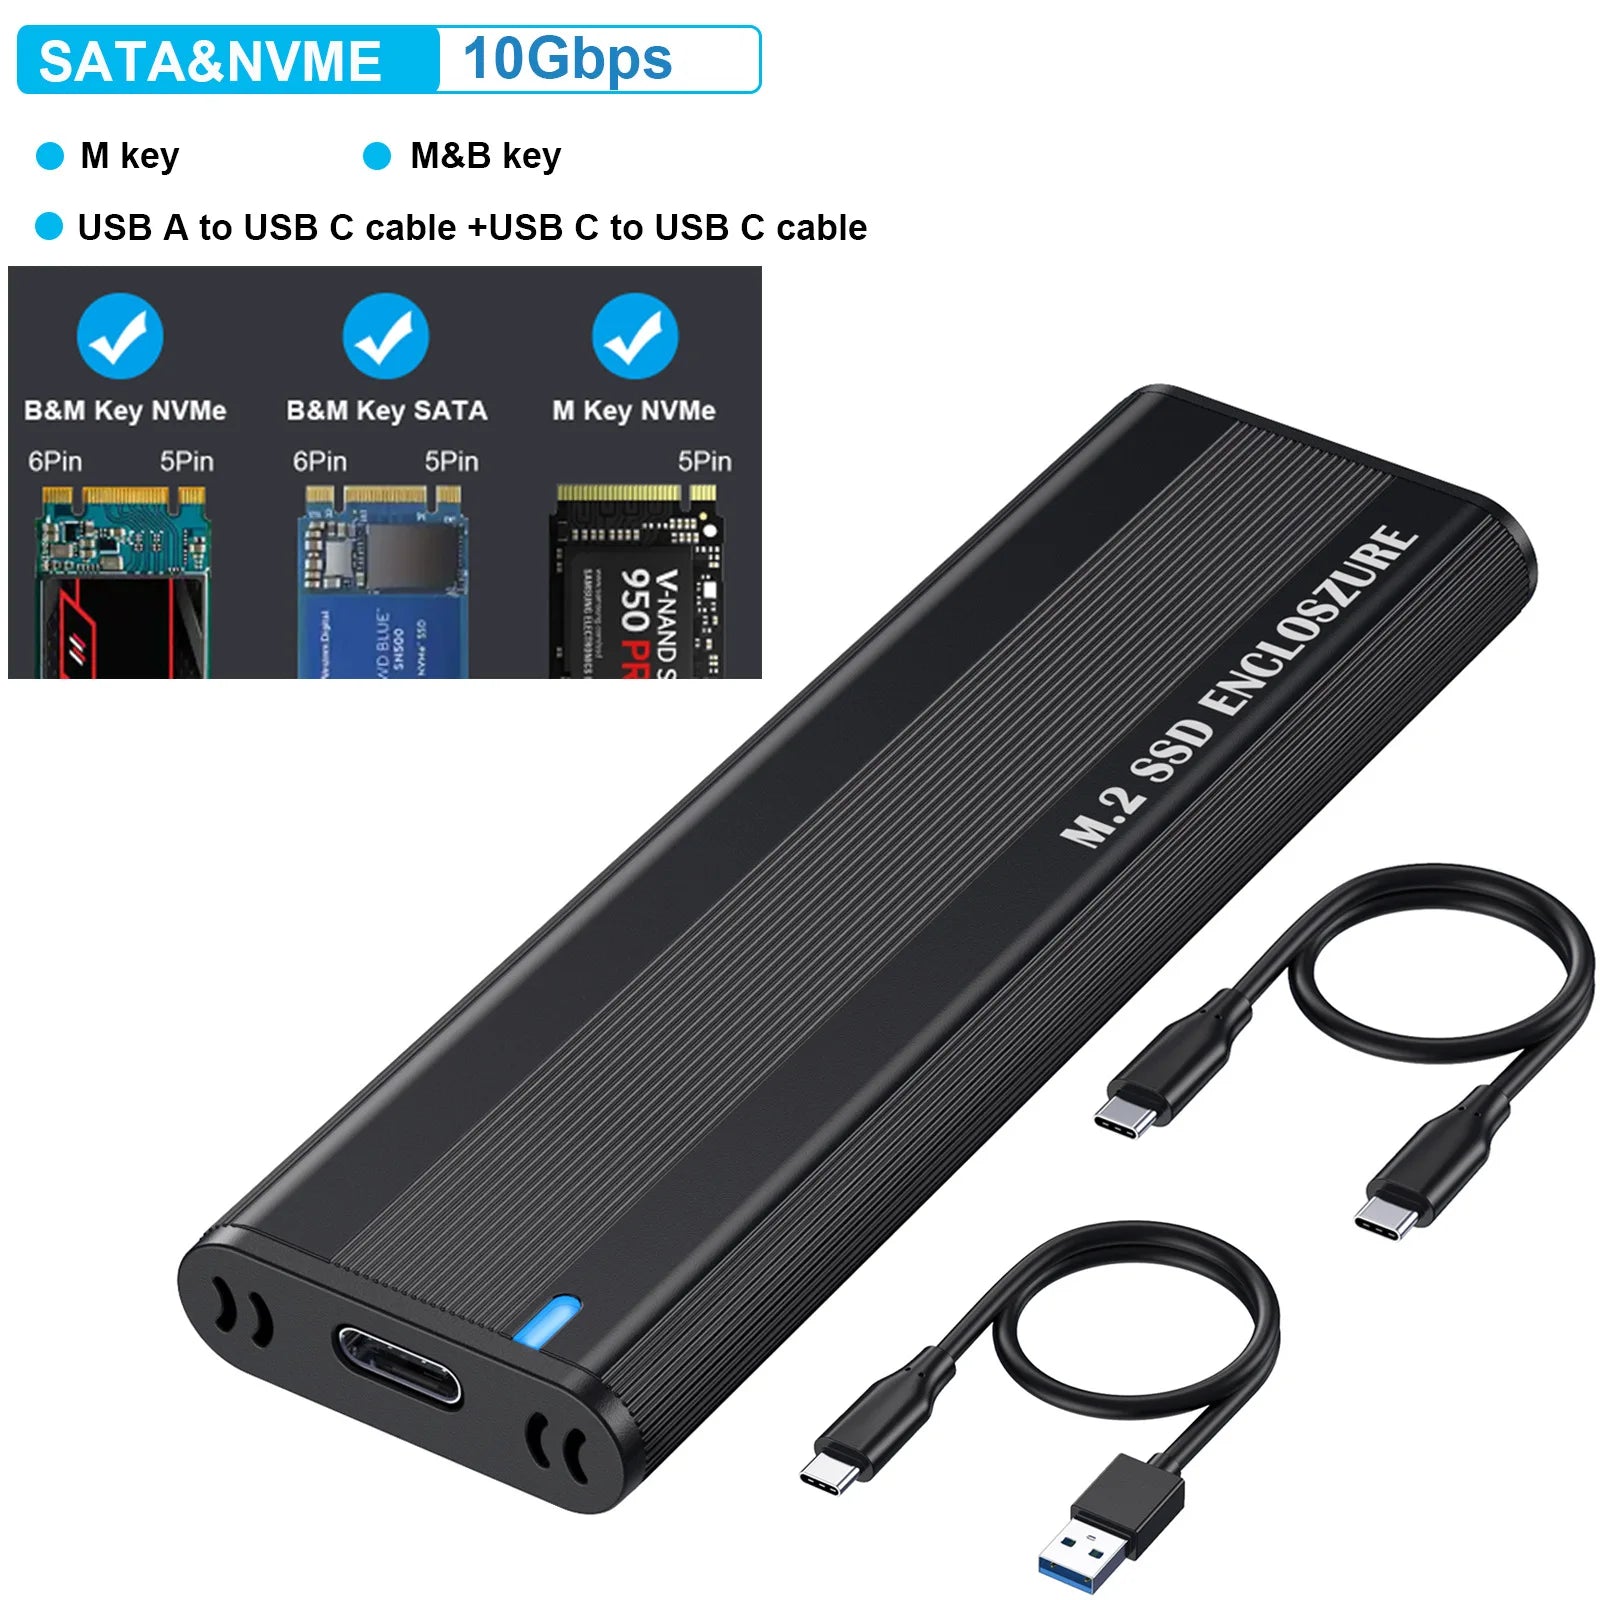 10Gbps M.2 NVMe High Speed External Case Adapter SSD Enclosure